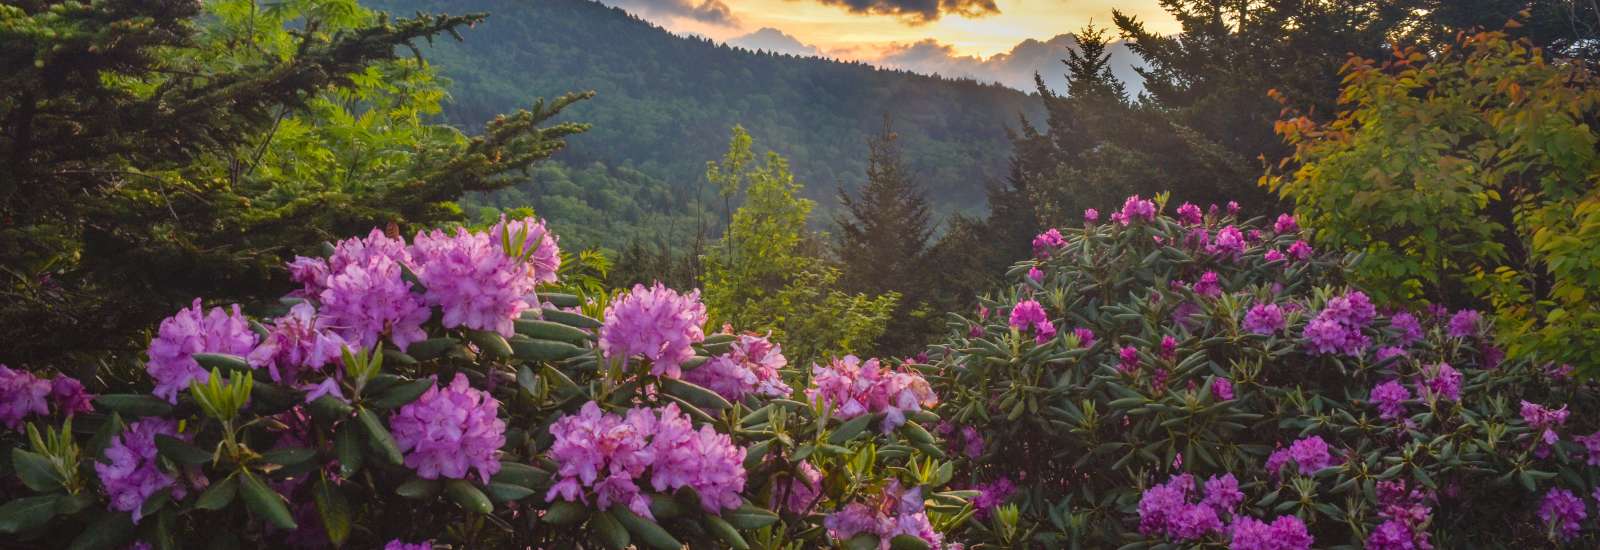 Rhododendron Blooms